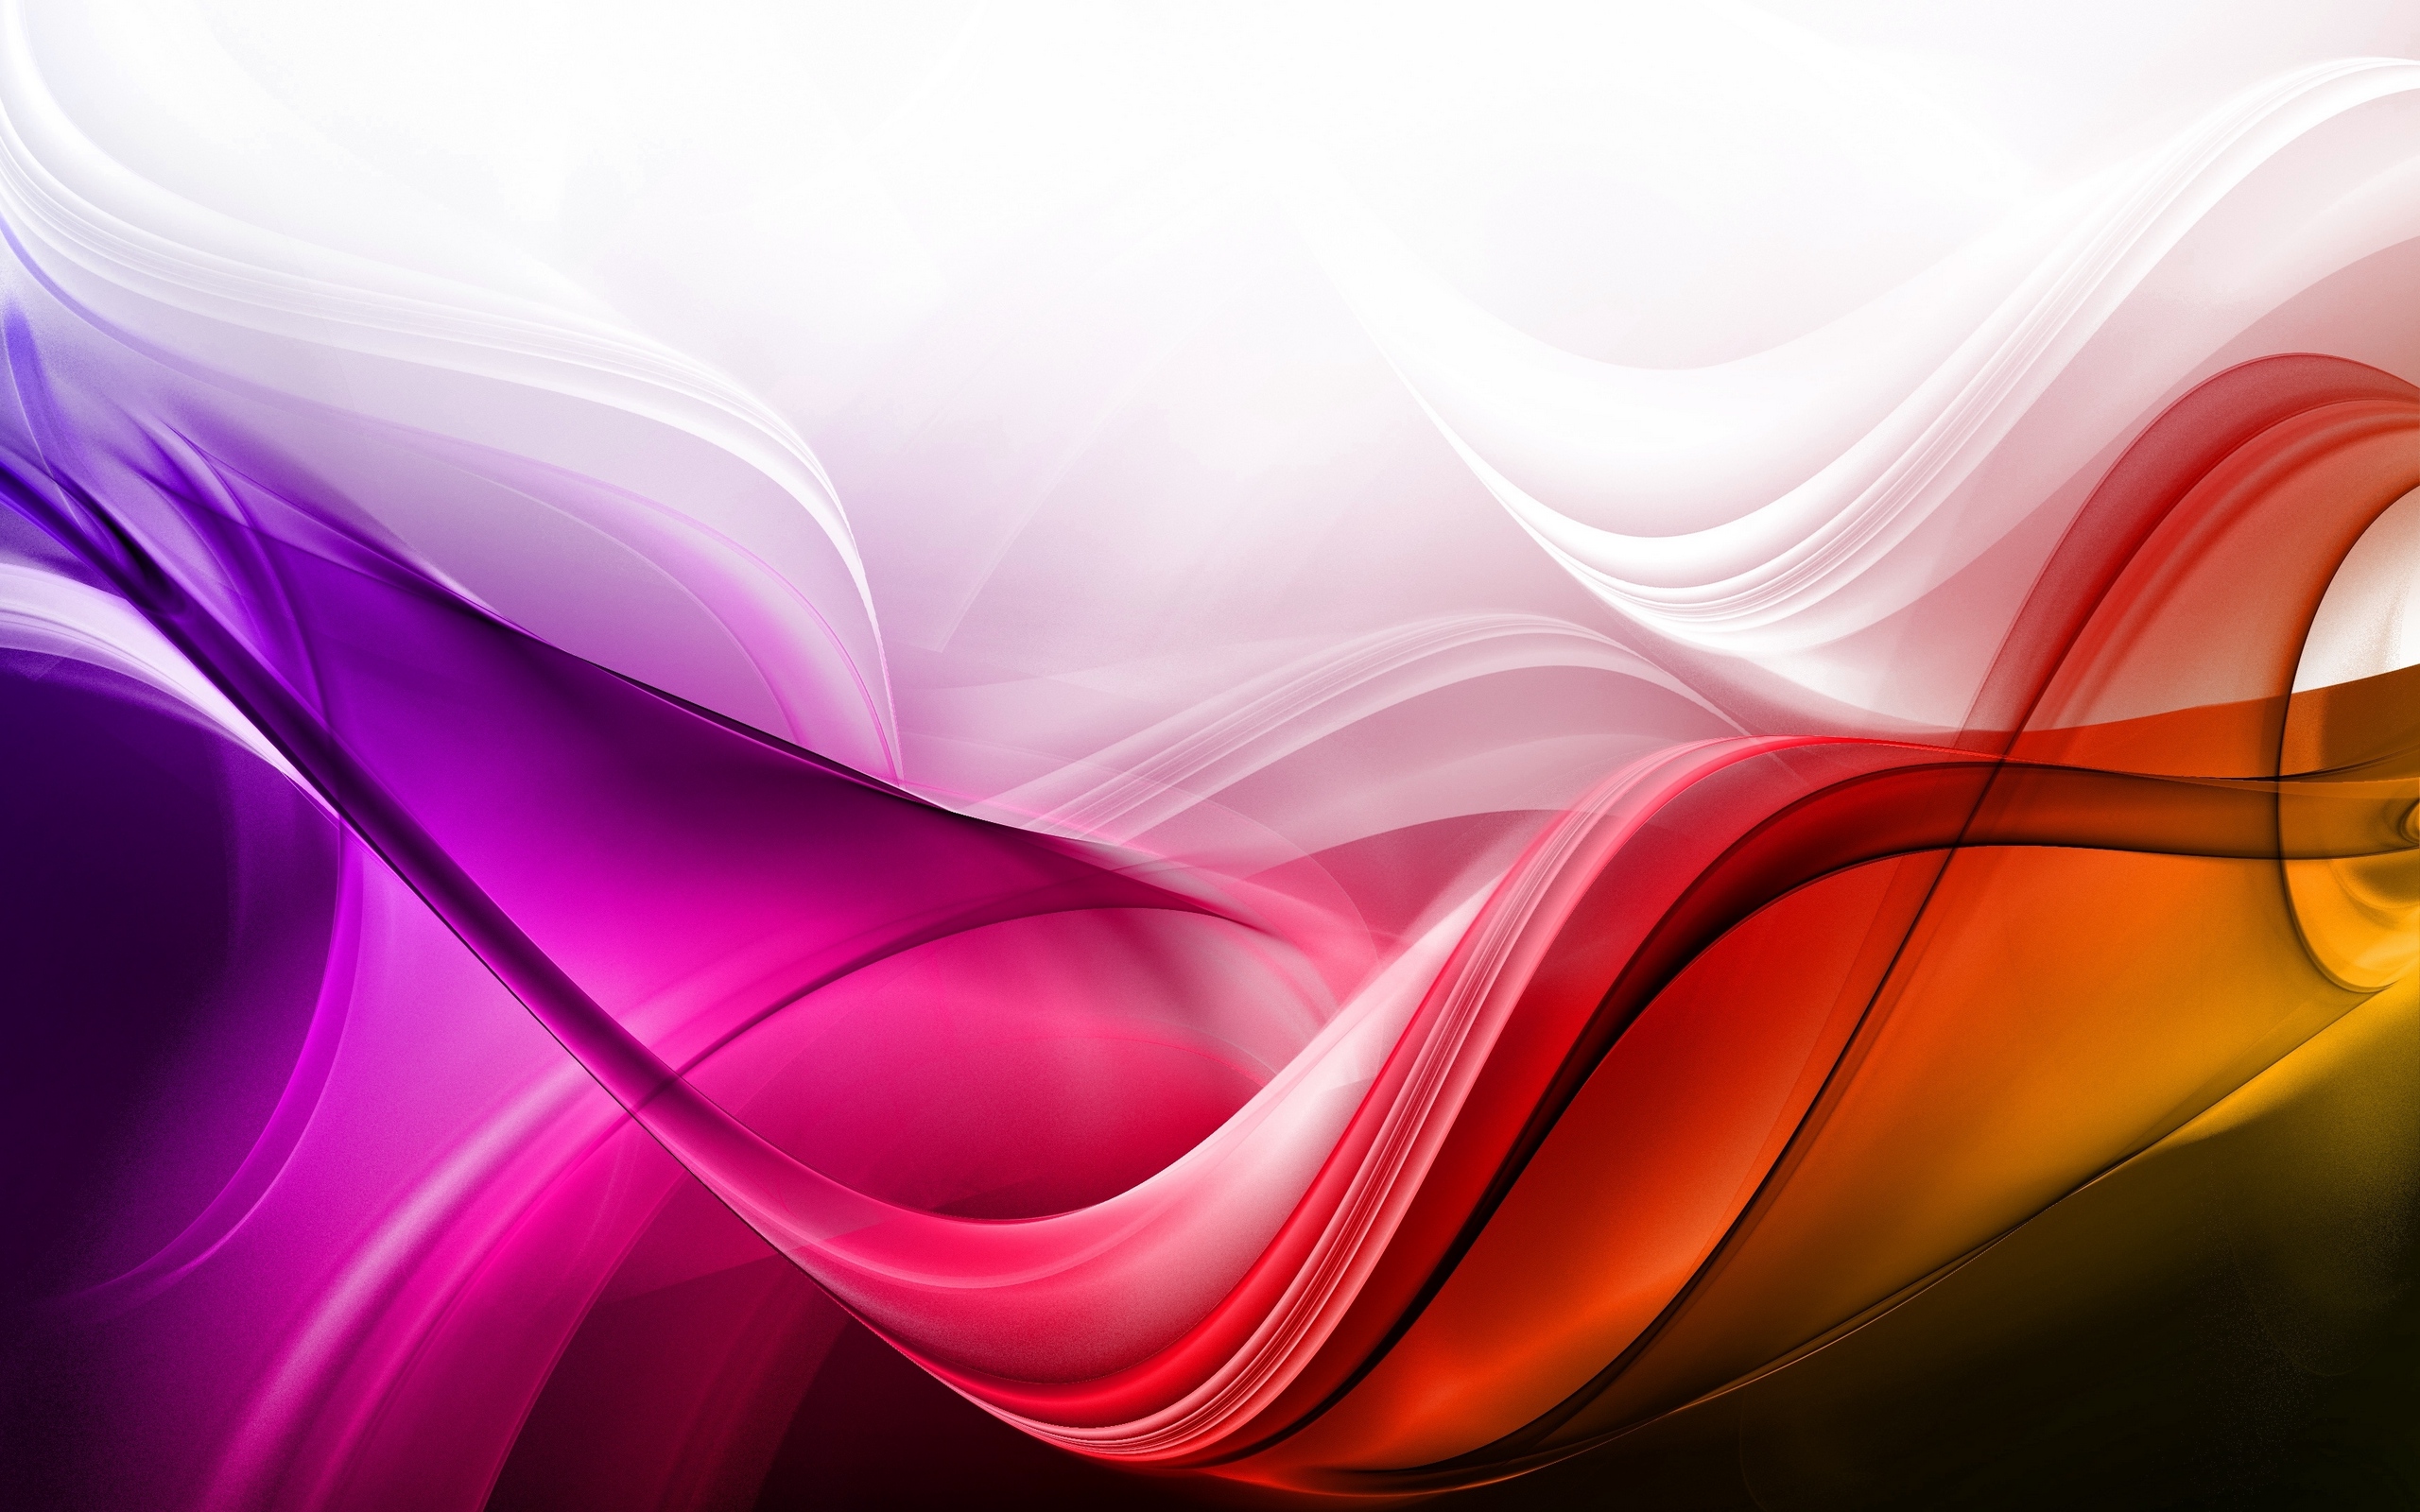 Download wallpaper 2560x1600 waves, background, colorful, lines